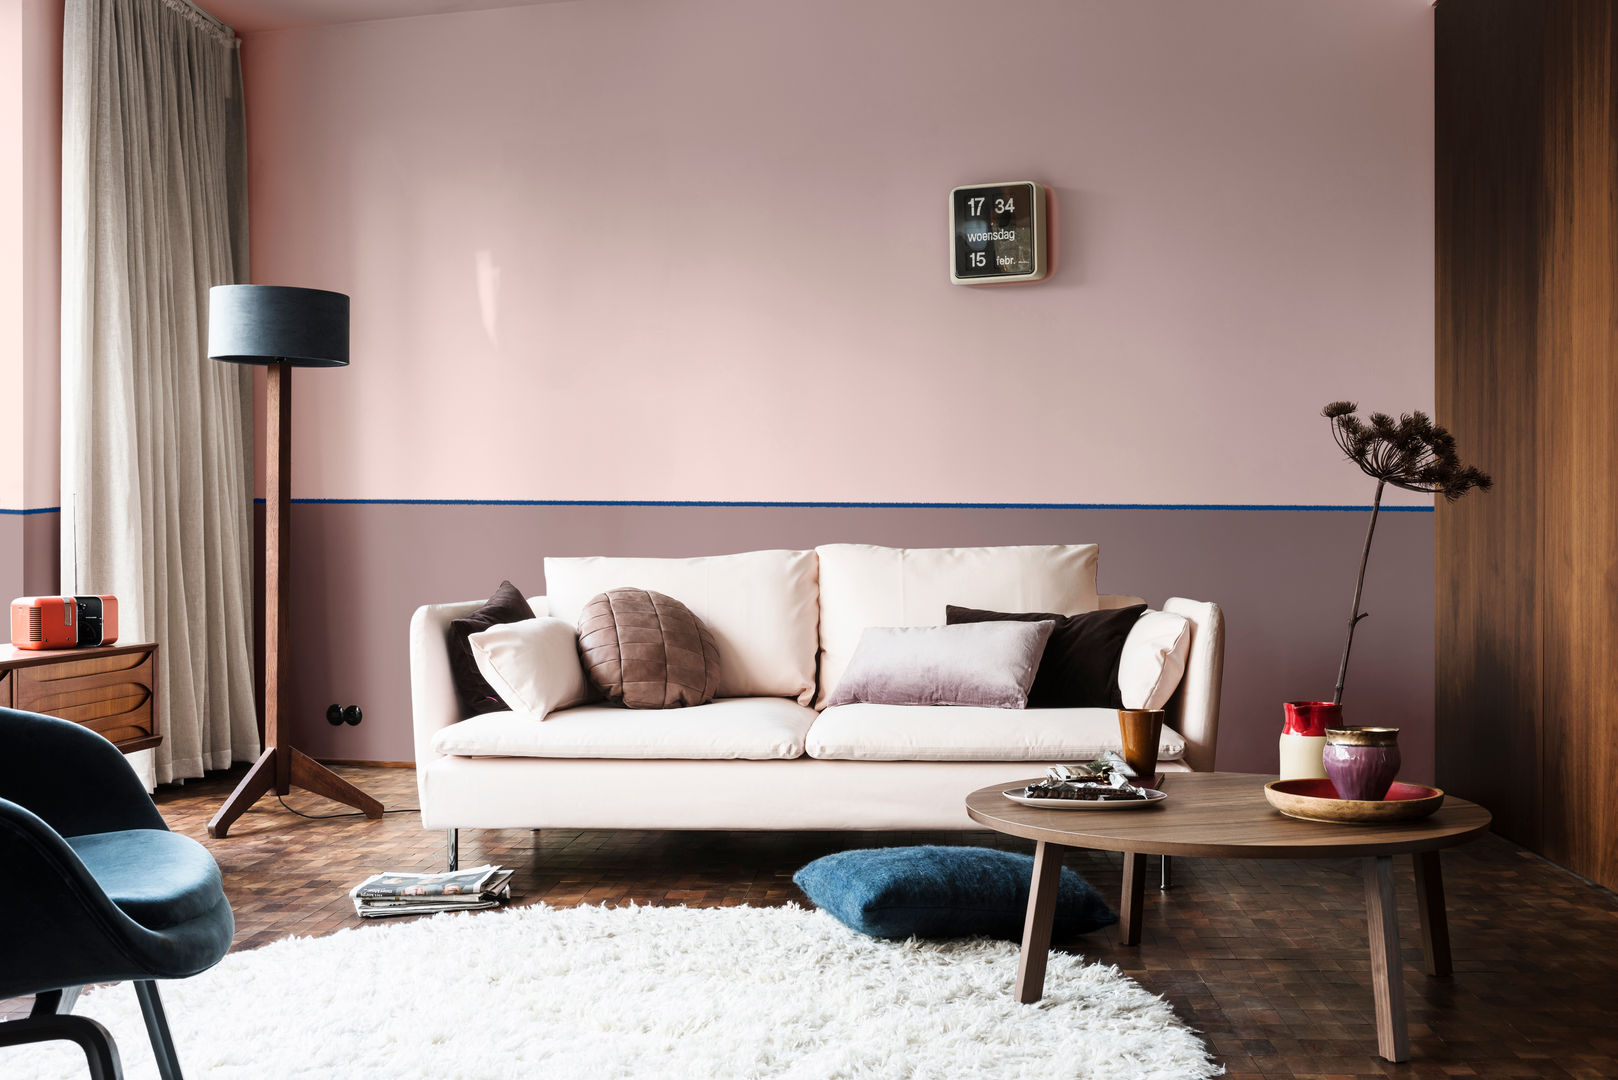 The Heart Wood Home Dulux UK Soggiorno in stile scandinavo pink,living room,lounge,heartwood,heart wood,paint,dulux,purple,colour of the year,relaxed,scandinavian,tonal